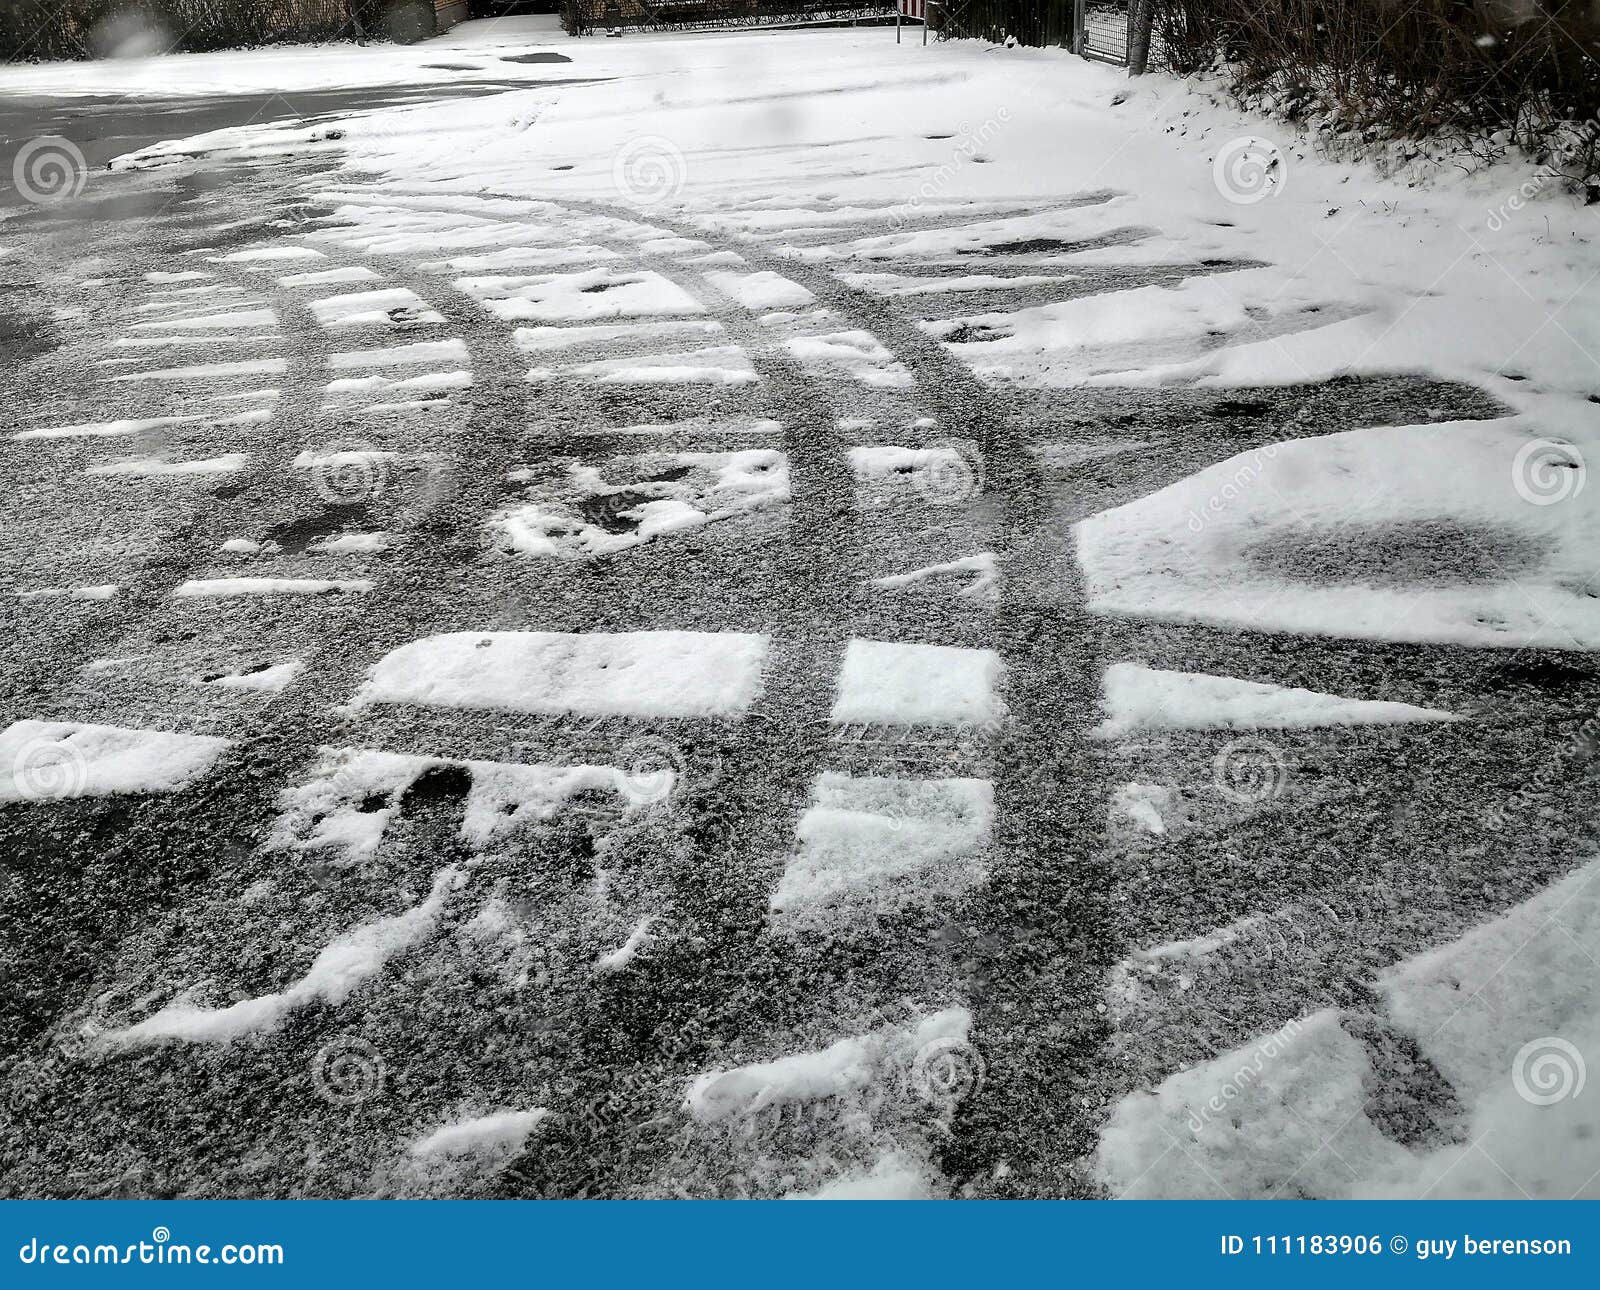 icey tracks on a road